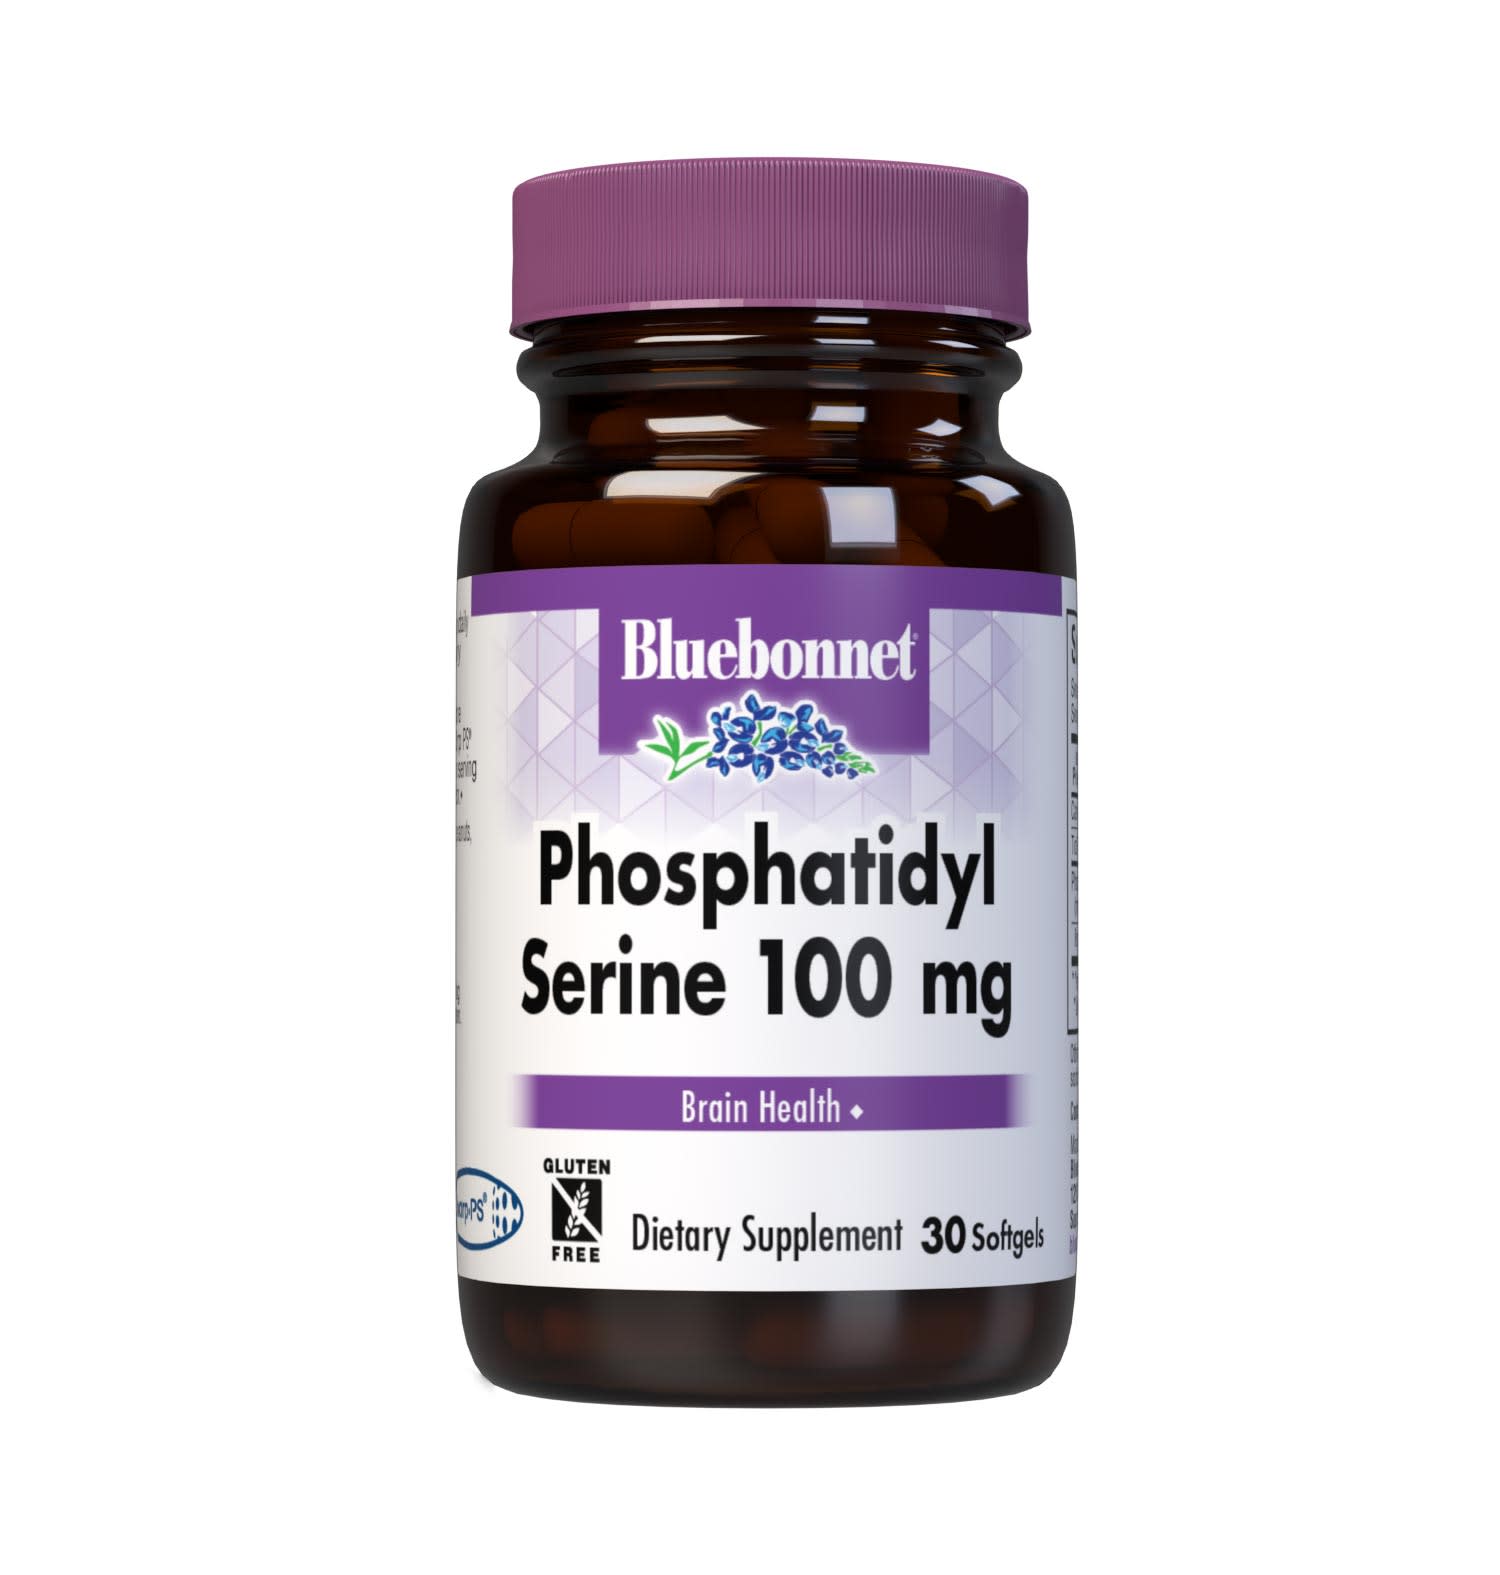 Bluebonnet’s Phosphatidylserine 100 mg 30 Softgels are formulated with patented phosphatidylserine (PS), Sharp PS derived from soybeans that delivers 100 mg of PS per serving to support brain health, memory and cognitive function. #size_30 count